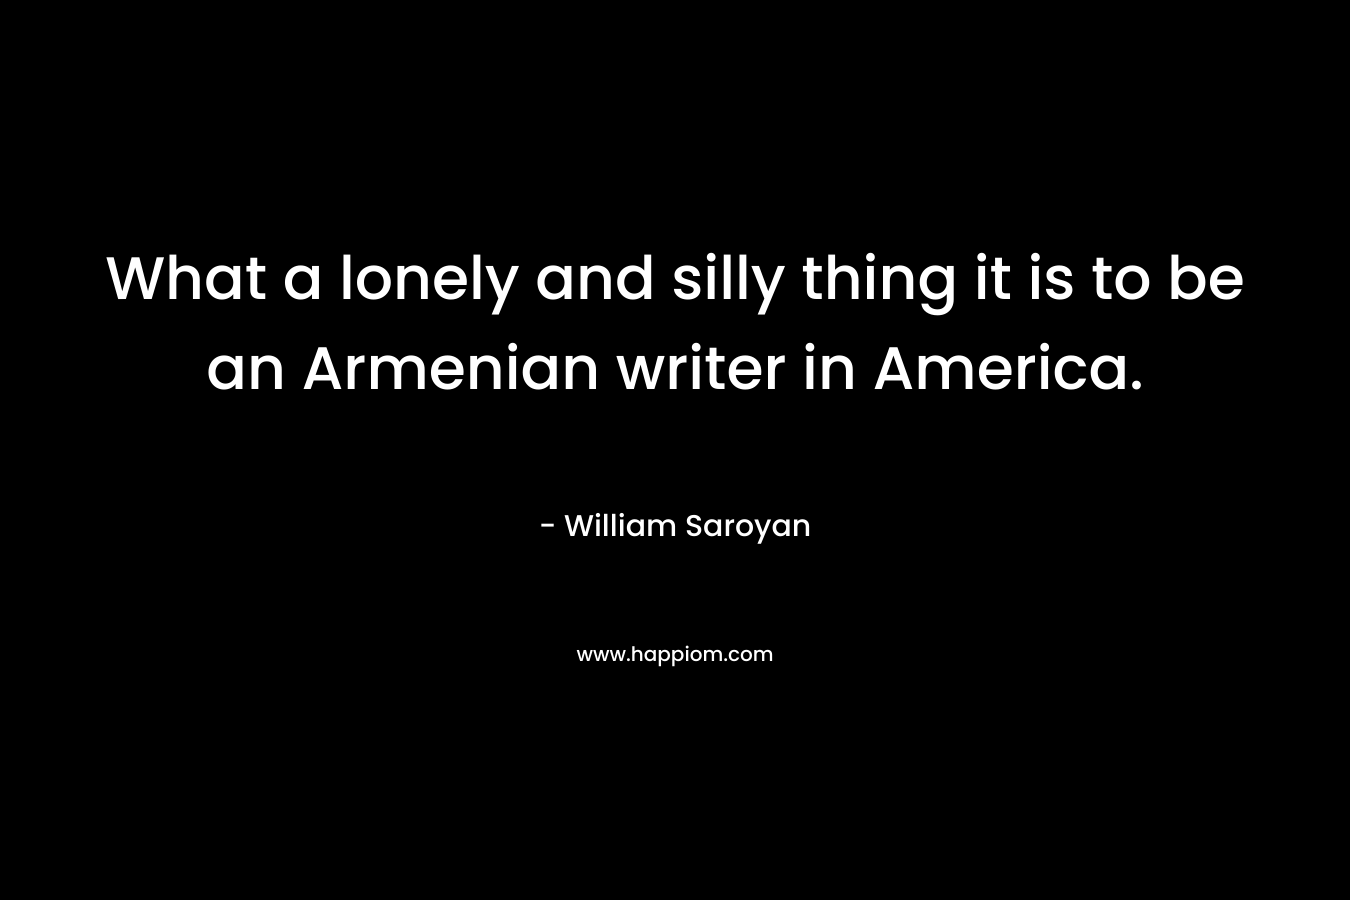 What a lonely and silly thing it is to be an Armenian writer in America. – William Saroyan